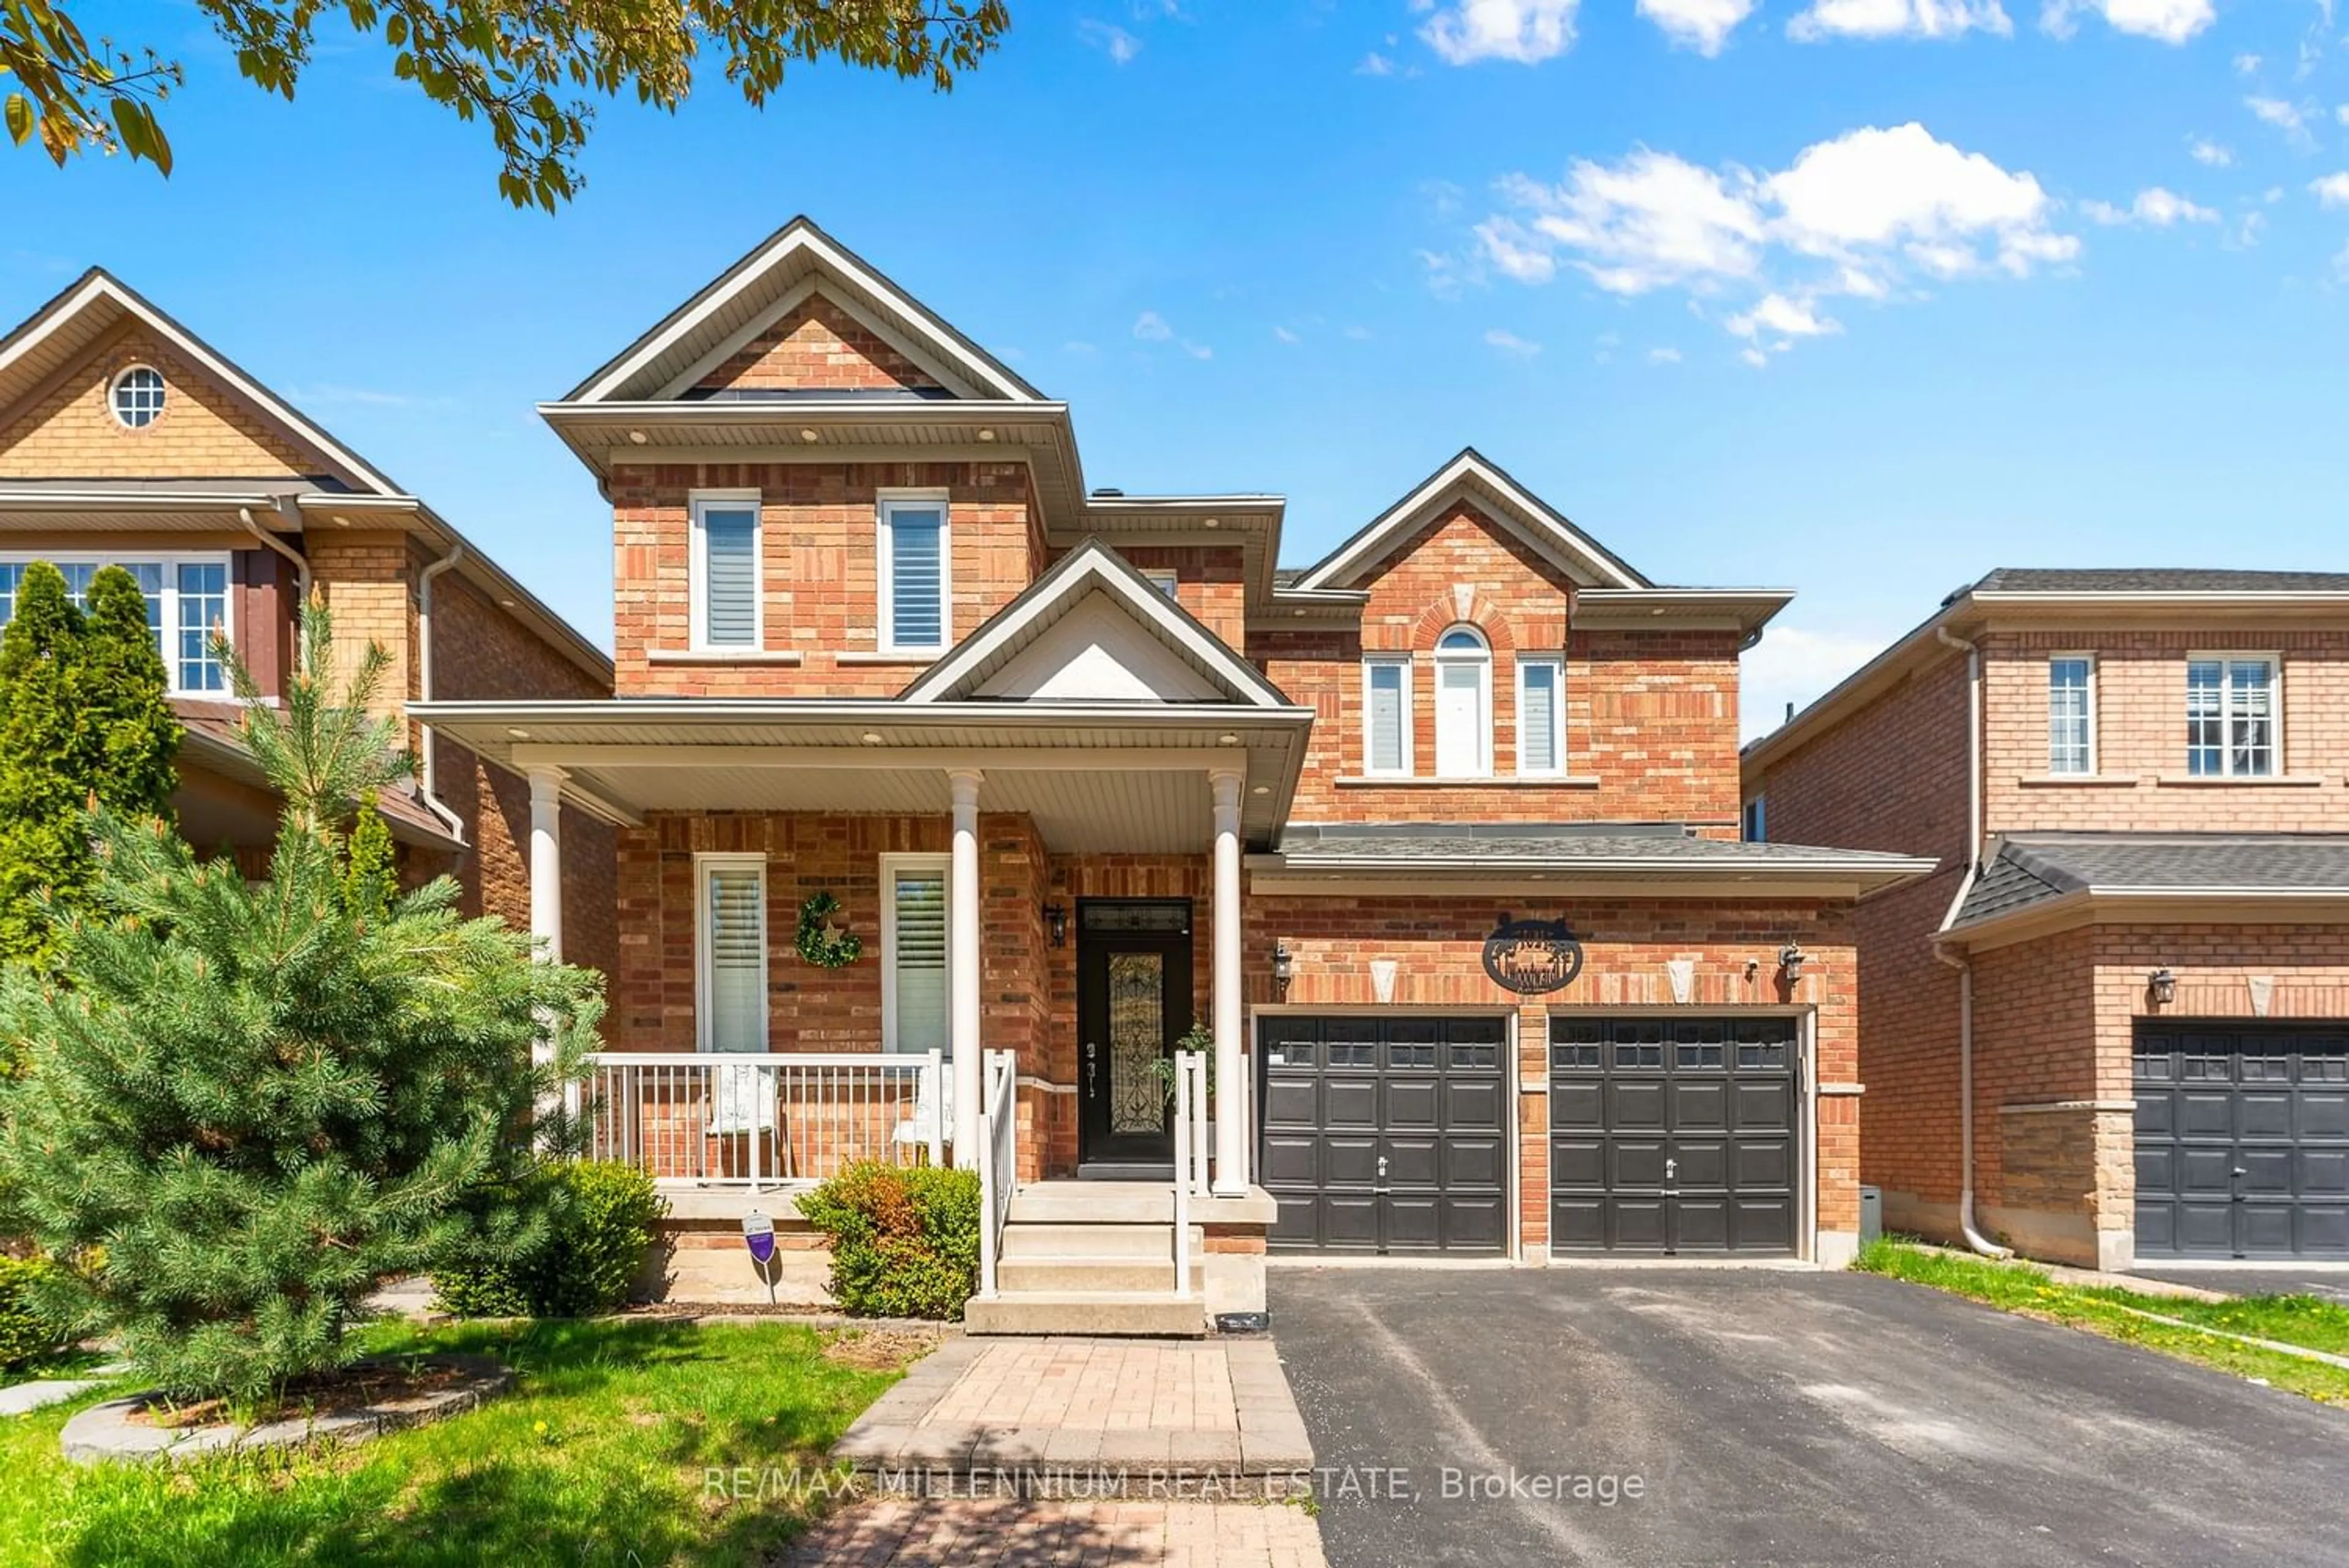 Home with brick exterior material for 1021 Woodward Ave, Milton Ontario L9T 5Y2